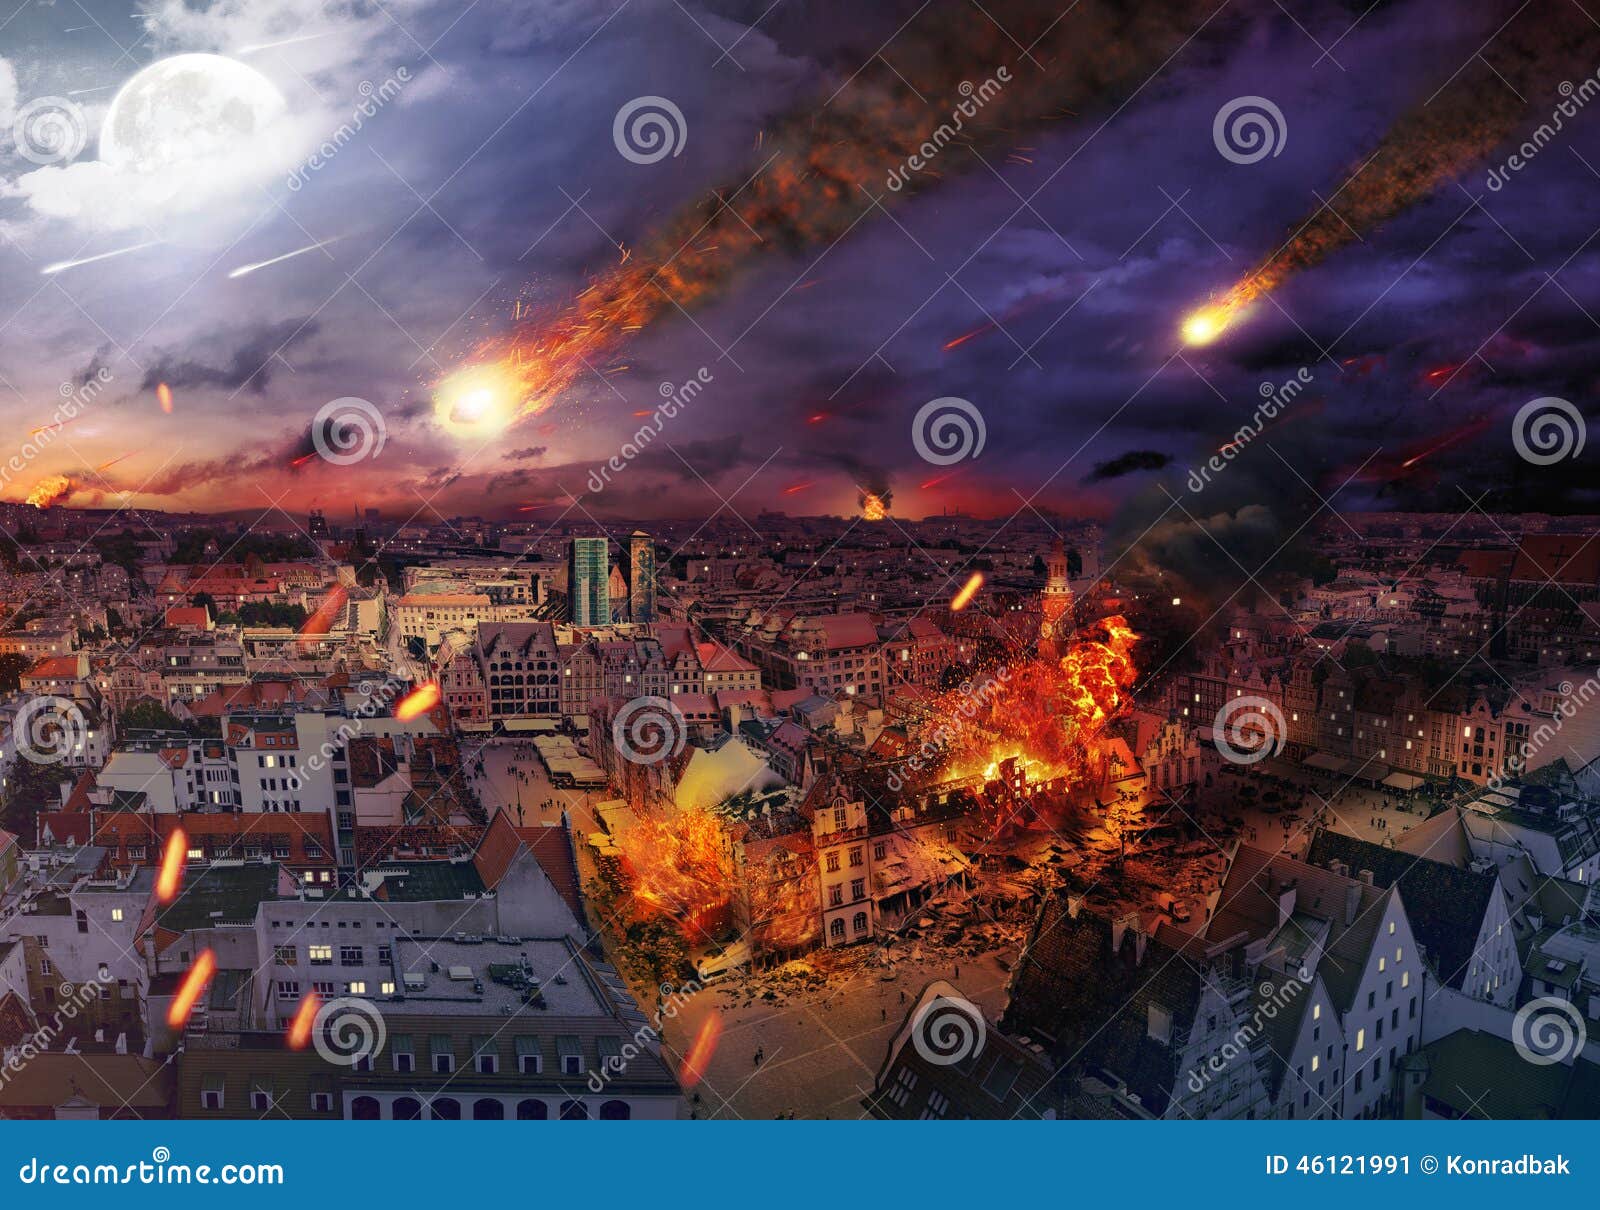 apocalypse caused by a meteorite